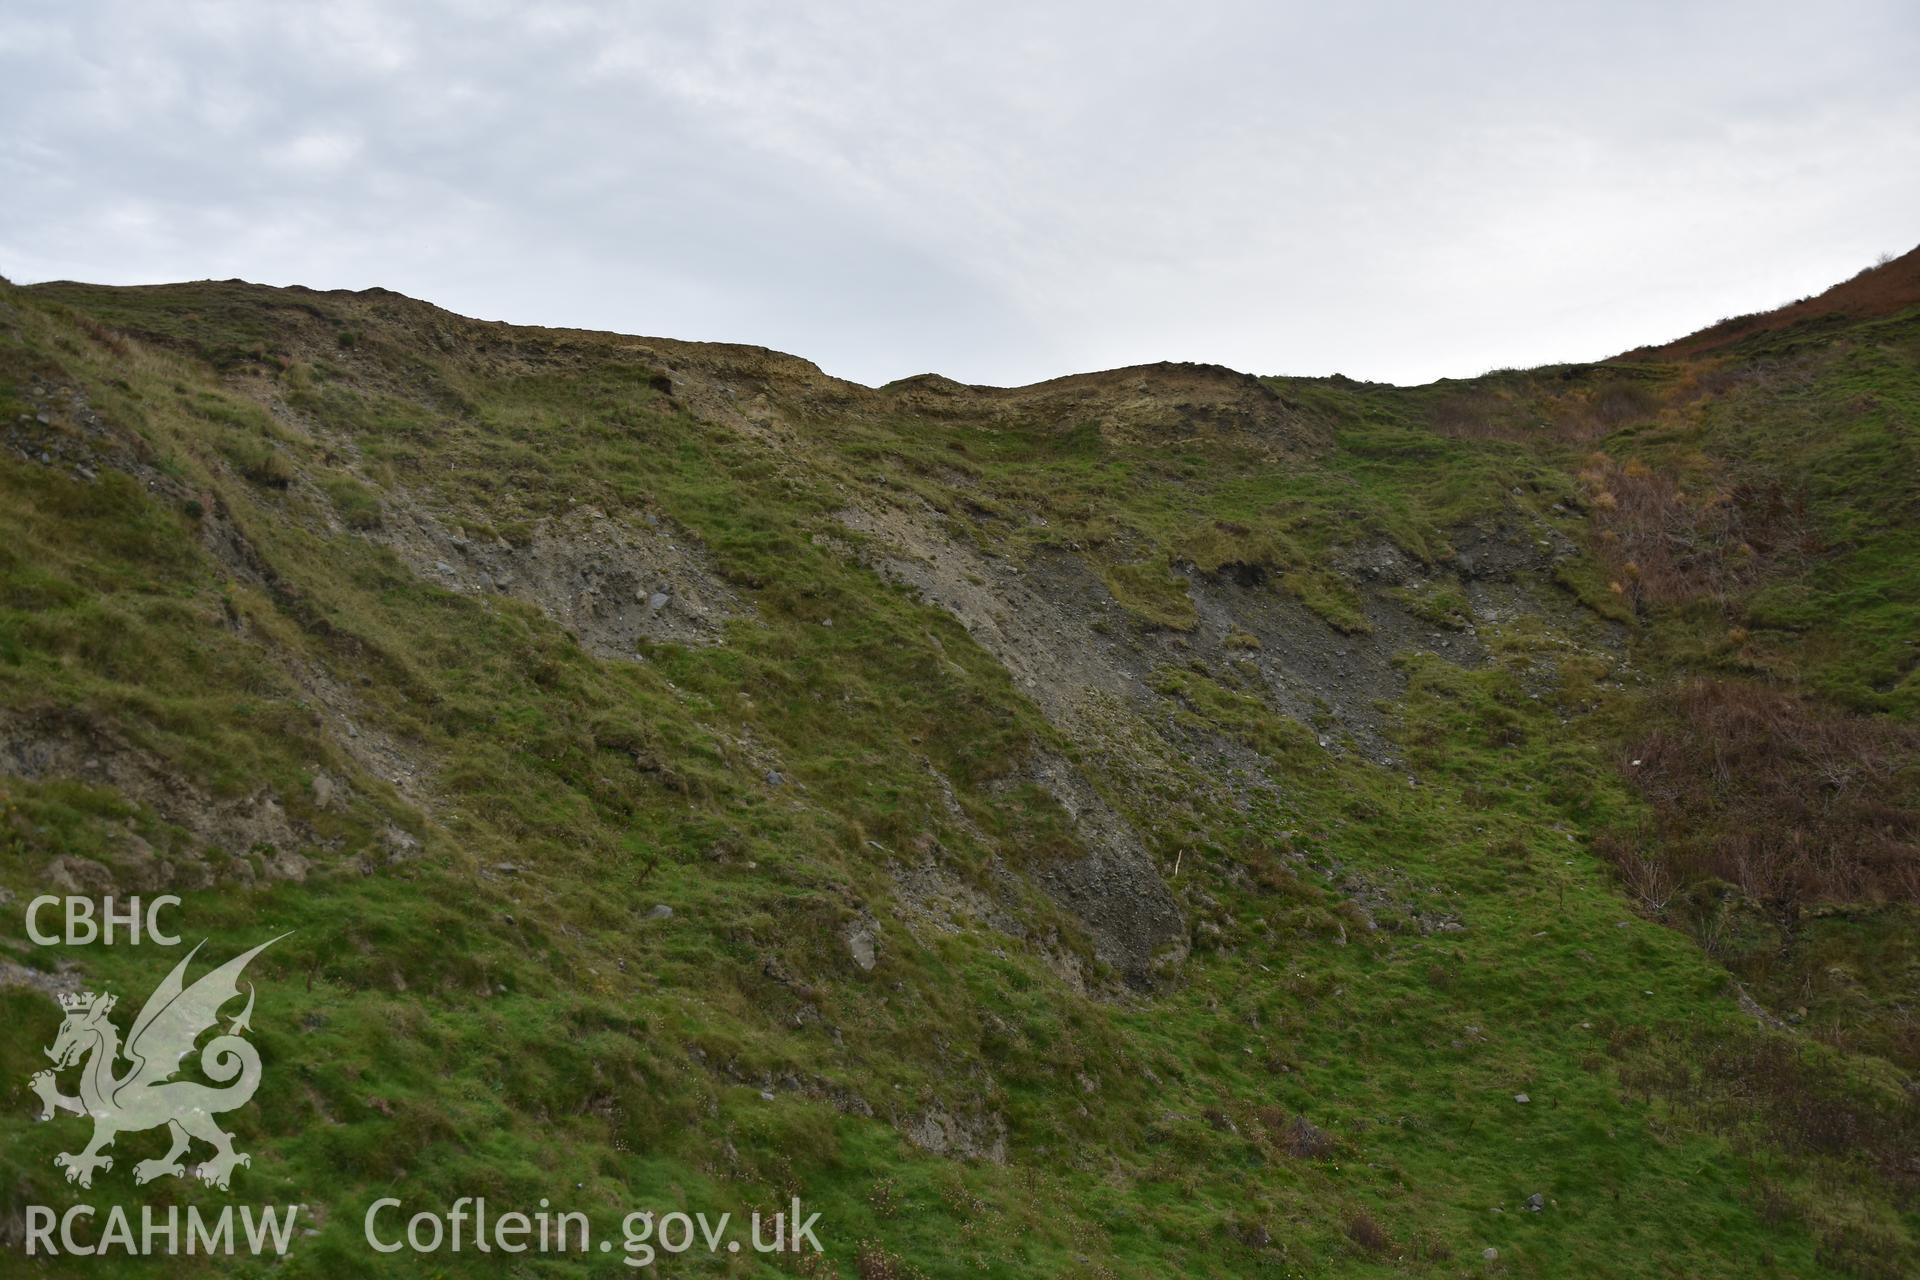 Cliff edge with eroding section from photographic survey of Castell Bach (NPRN 93914) by Louise Barker for CHERISH project site monitoring 31/10/2018.
Produced with EU funds through the Ireland Wales Co-operation Programme 2014-2020. All material made freely available through the Open Government Licence.